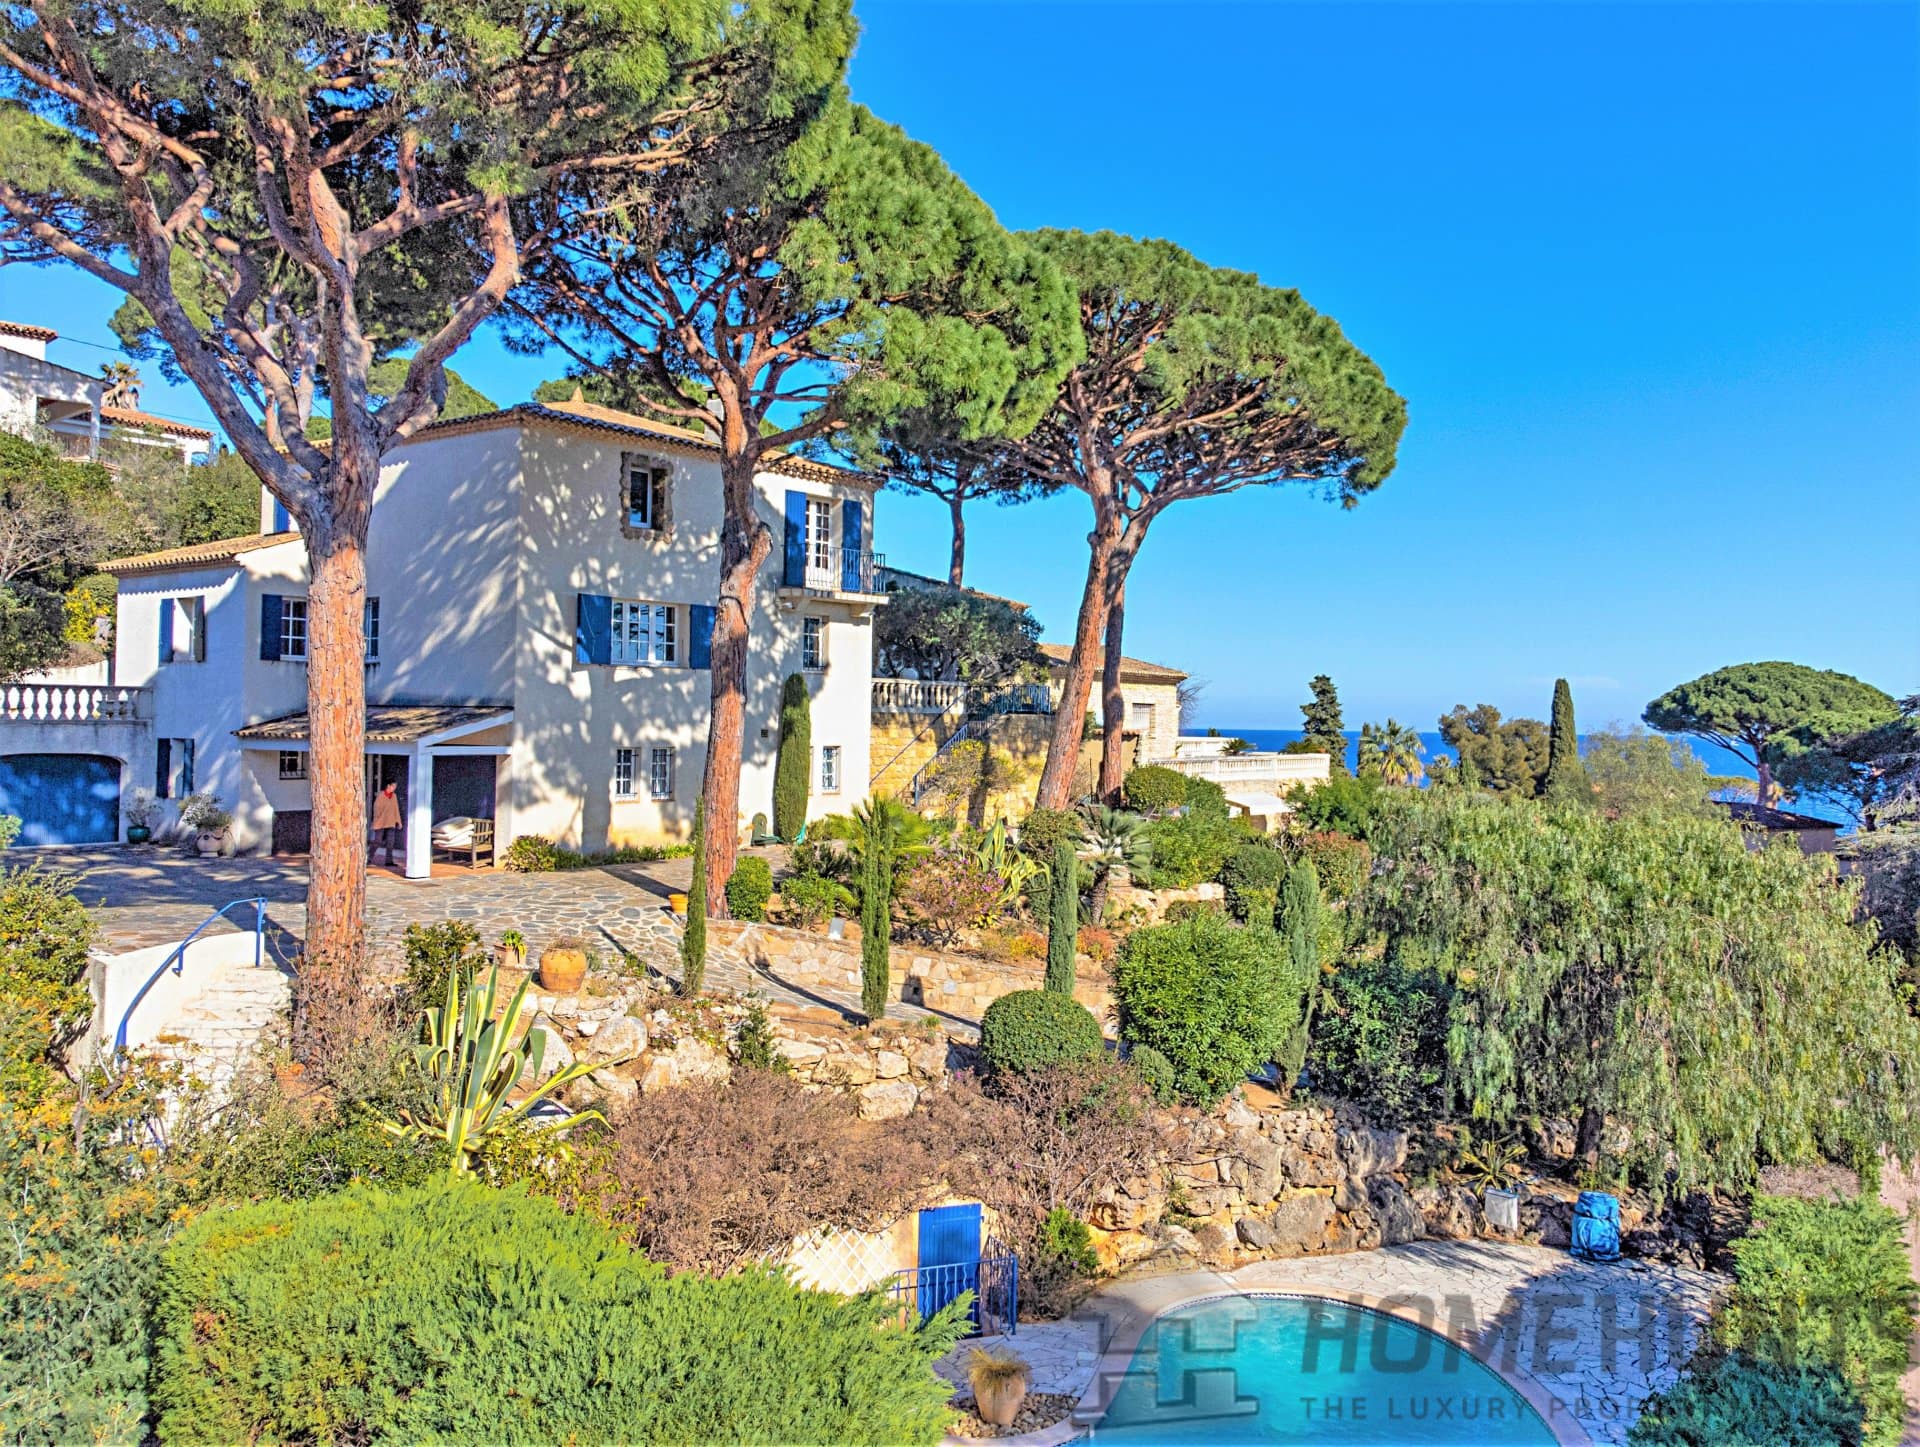 Villa/House For Sale in Ste Maxime 21